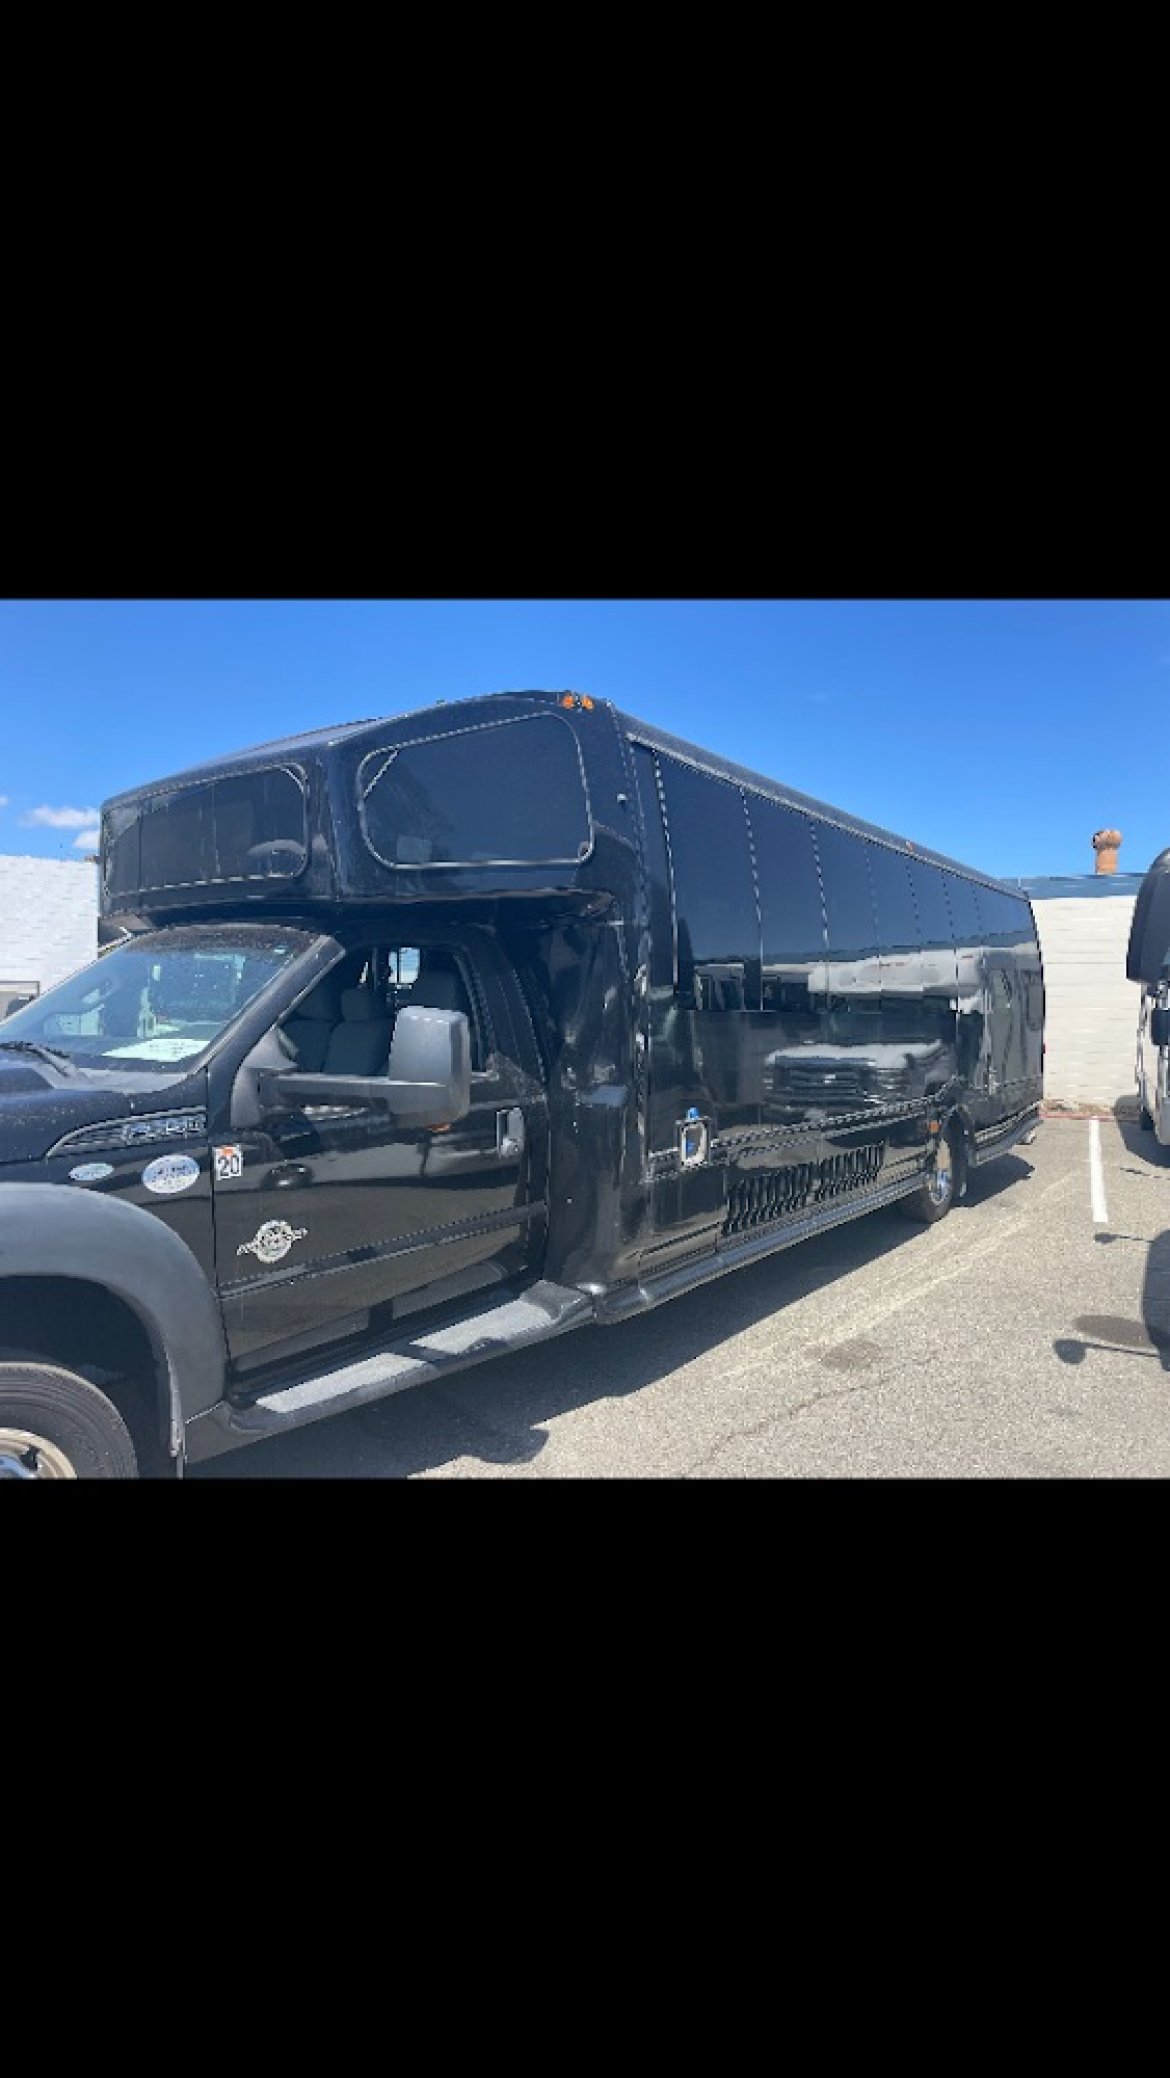 Executive Shuttle for sale: 2012 Ford F550 by Turtle Top